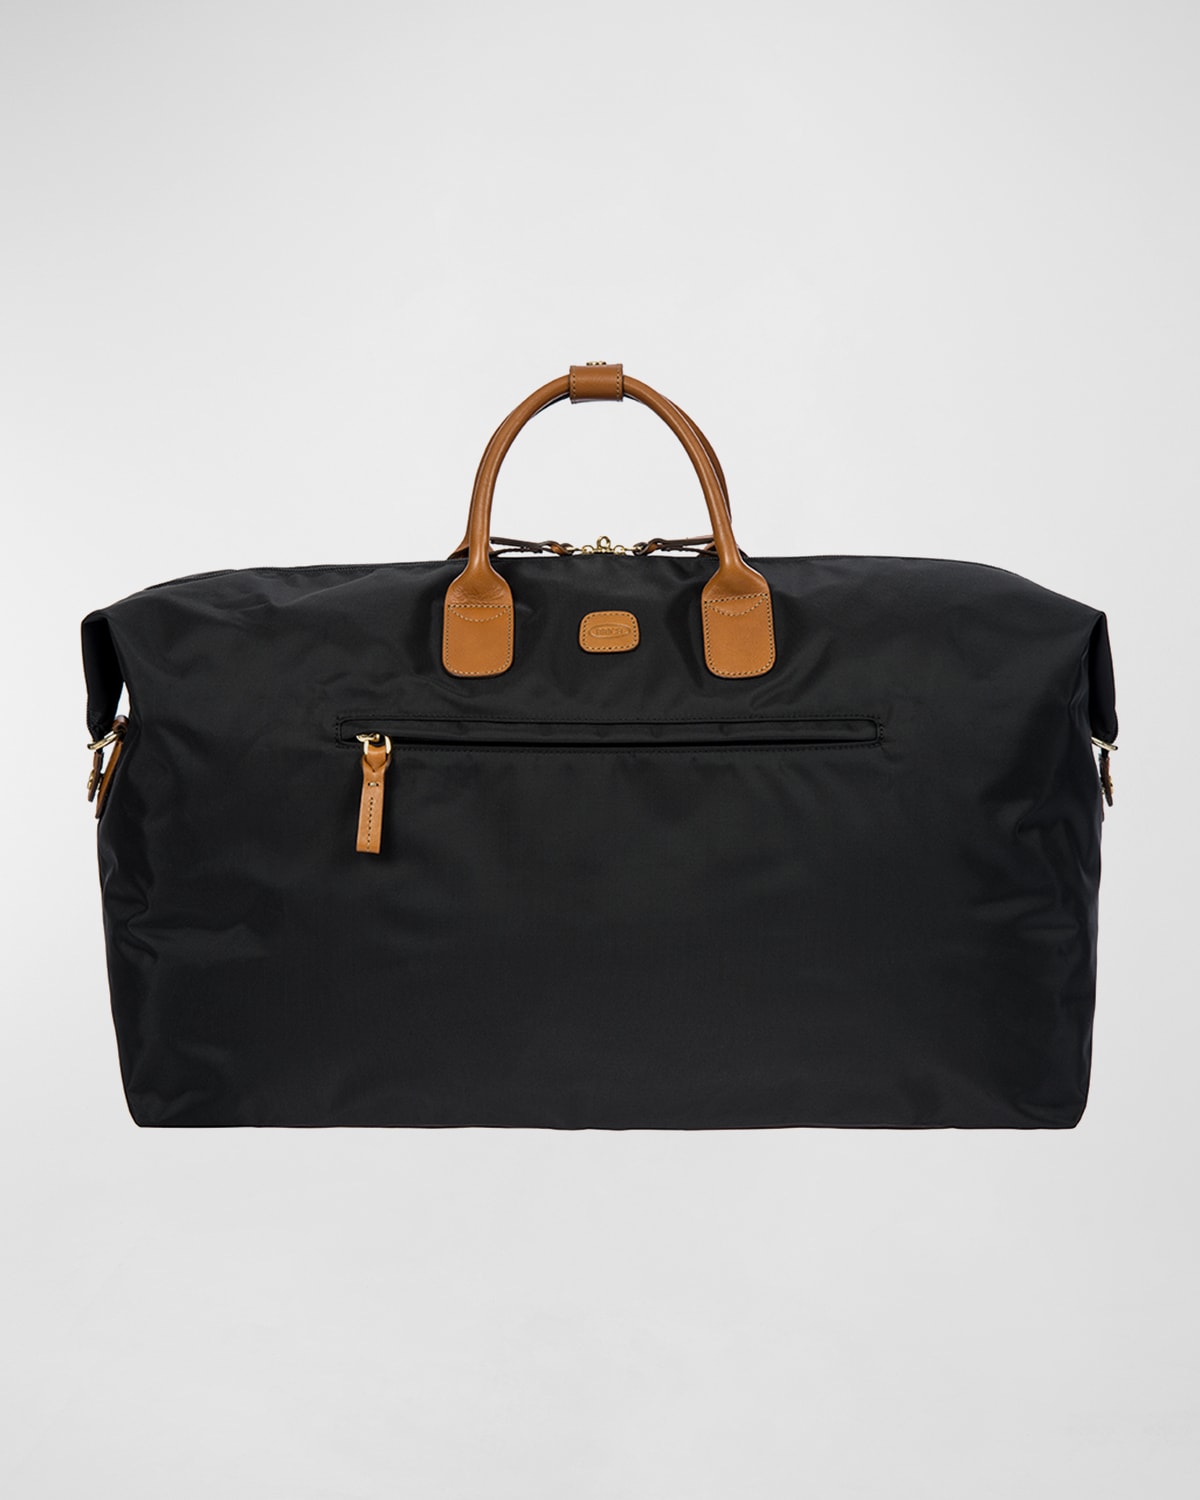 Bric's X-Bag 22" Deluxe Duffel Luggage